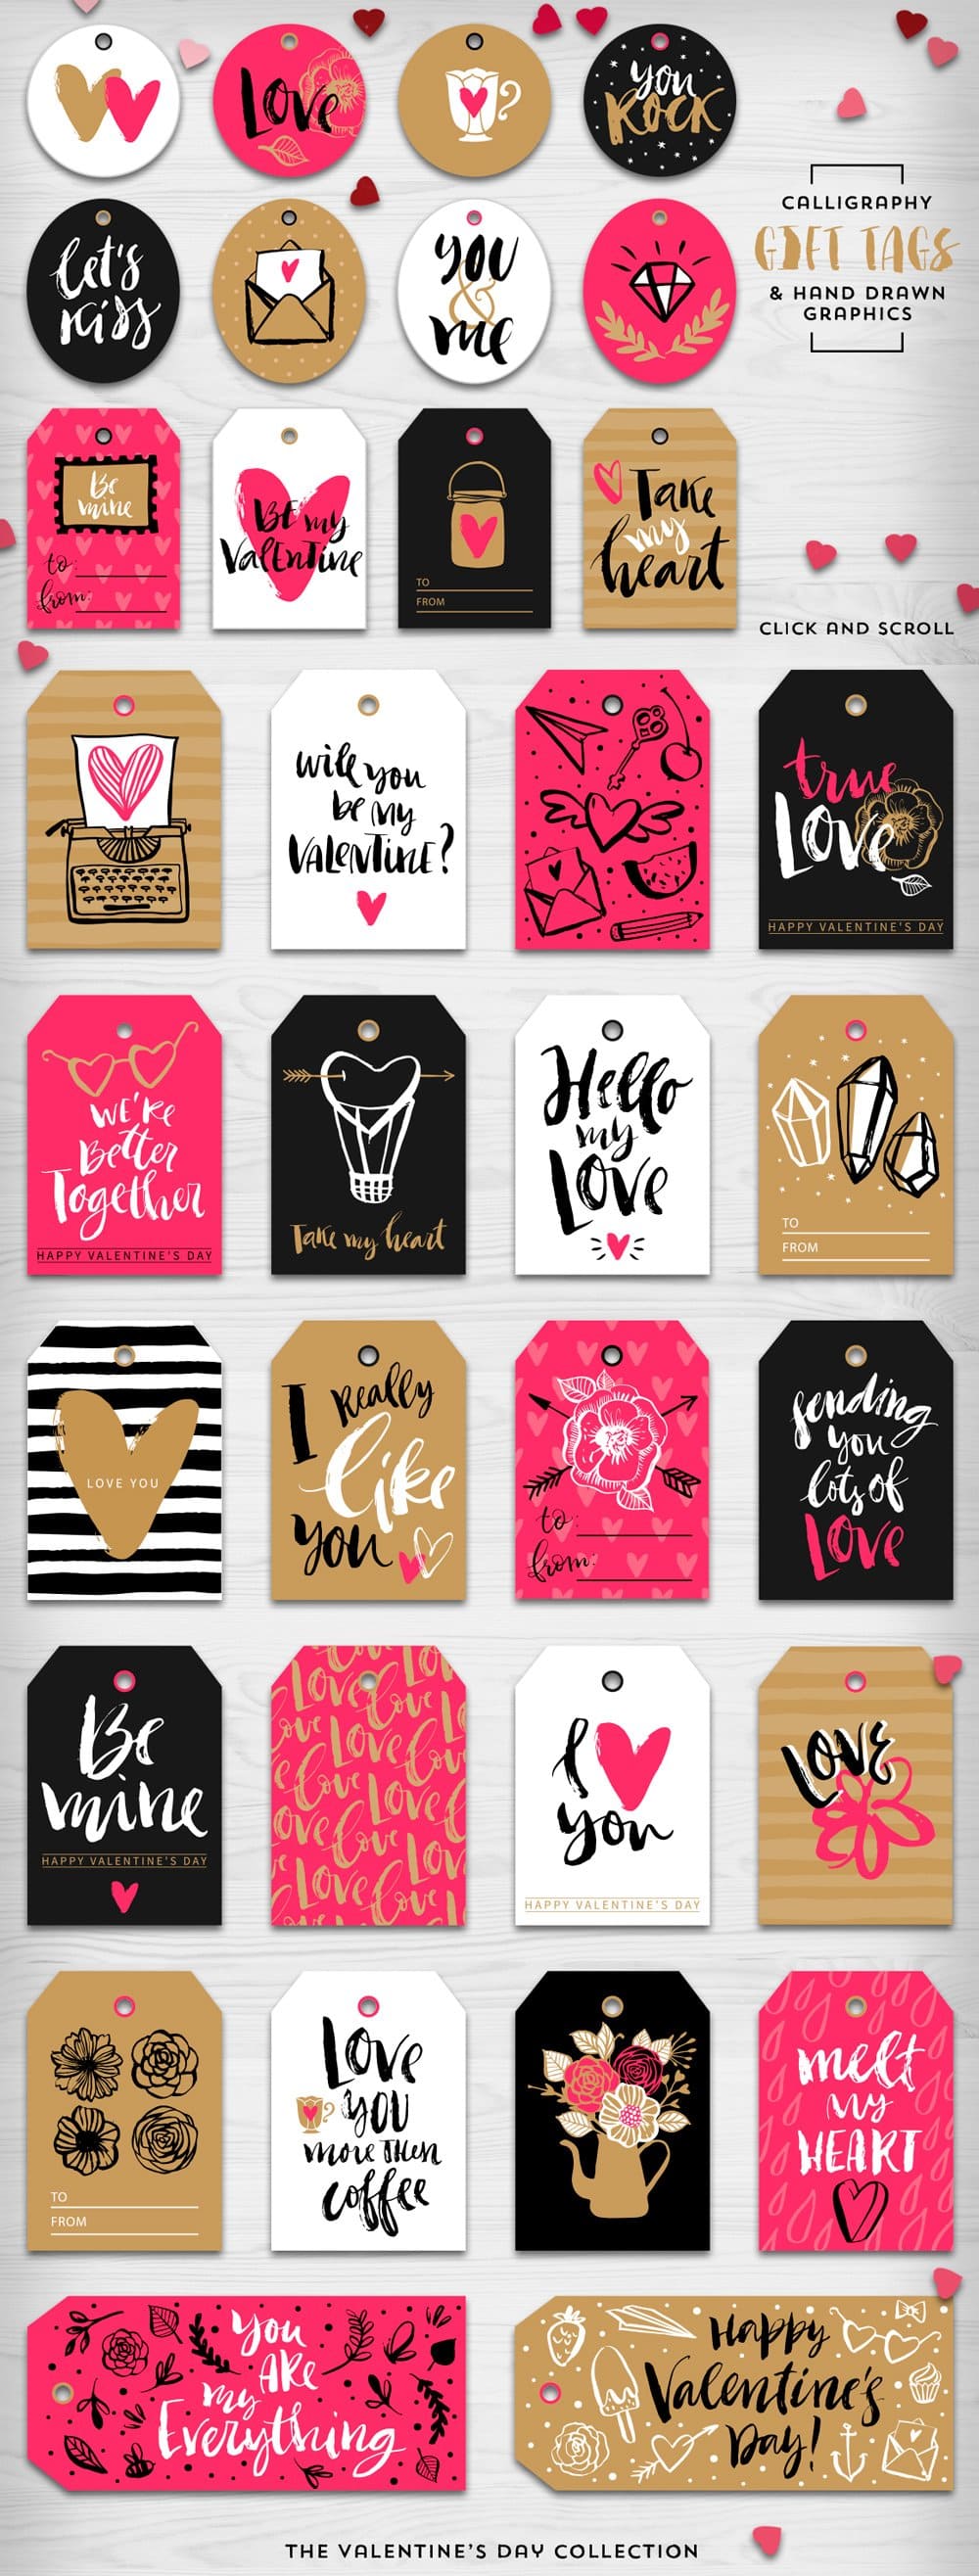 Cards in black, pink and beige colors with inscriptions for Valentine's Day.